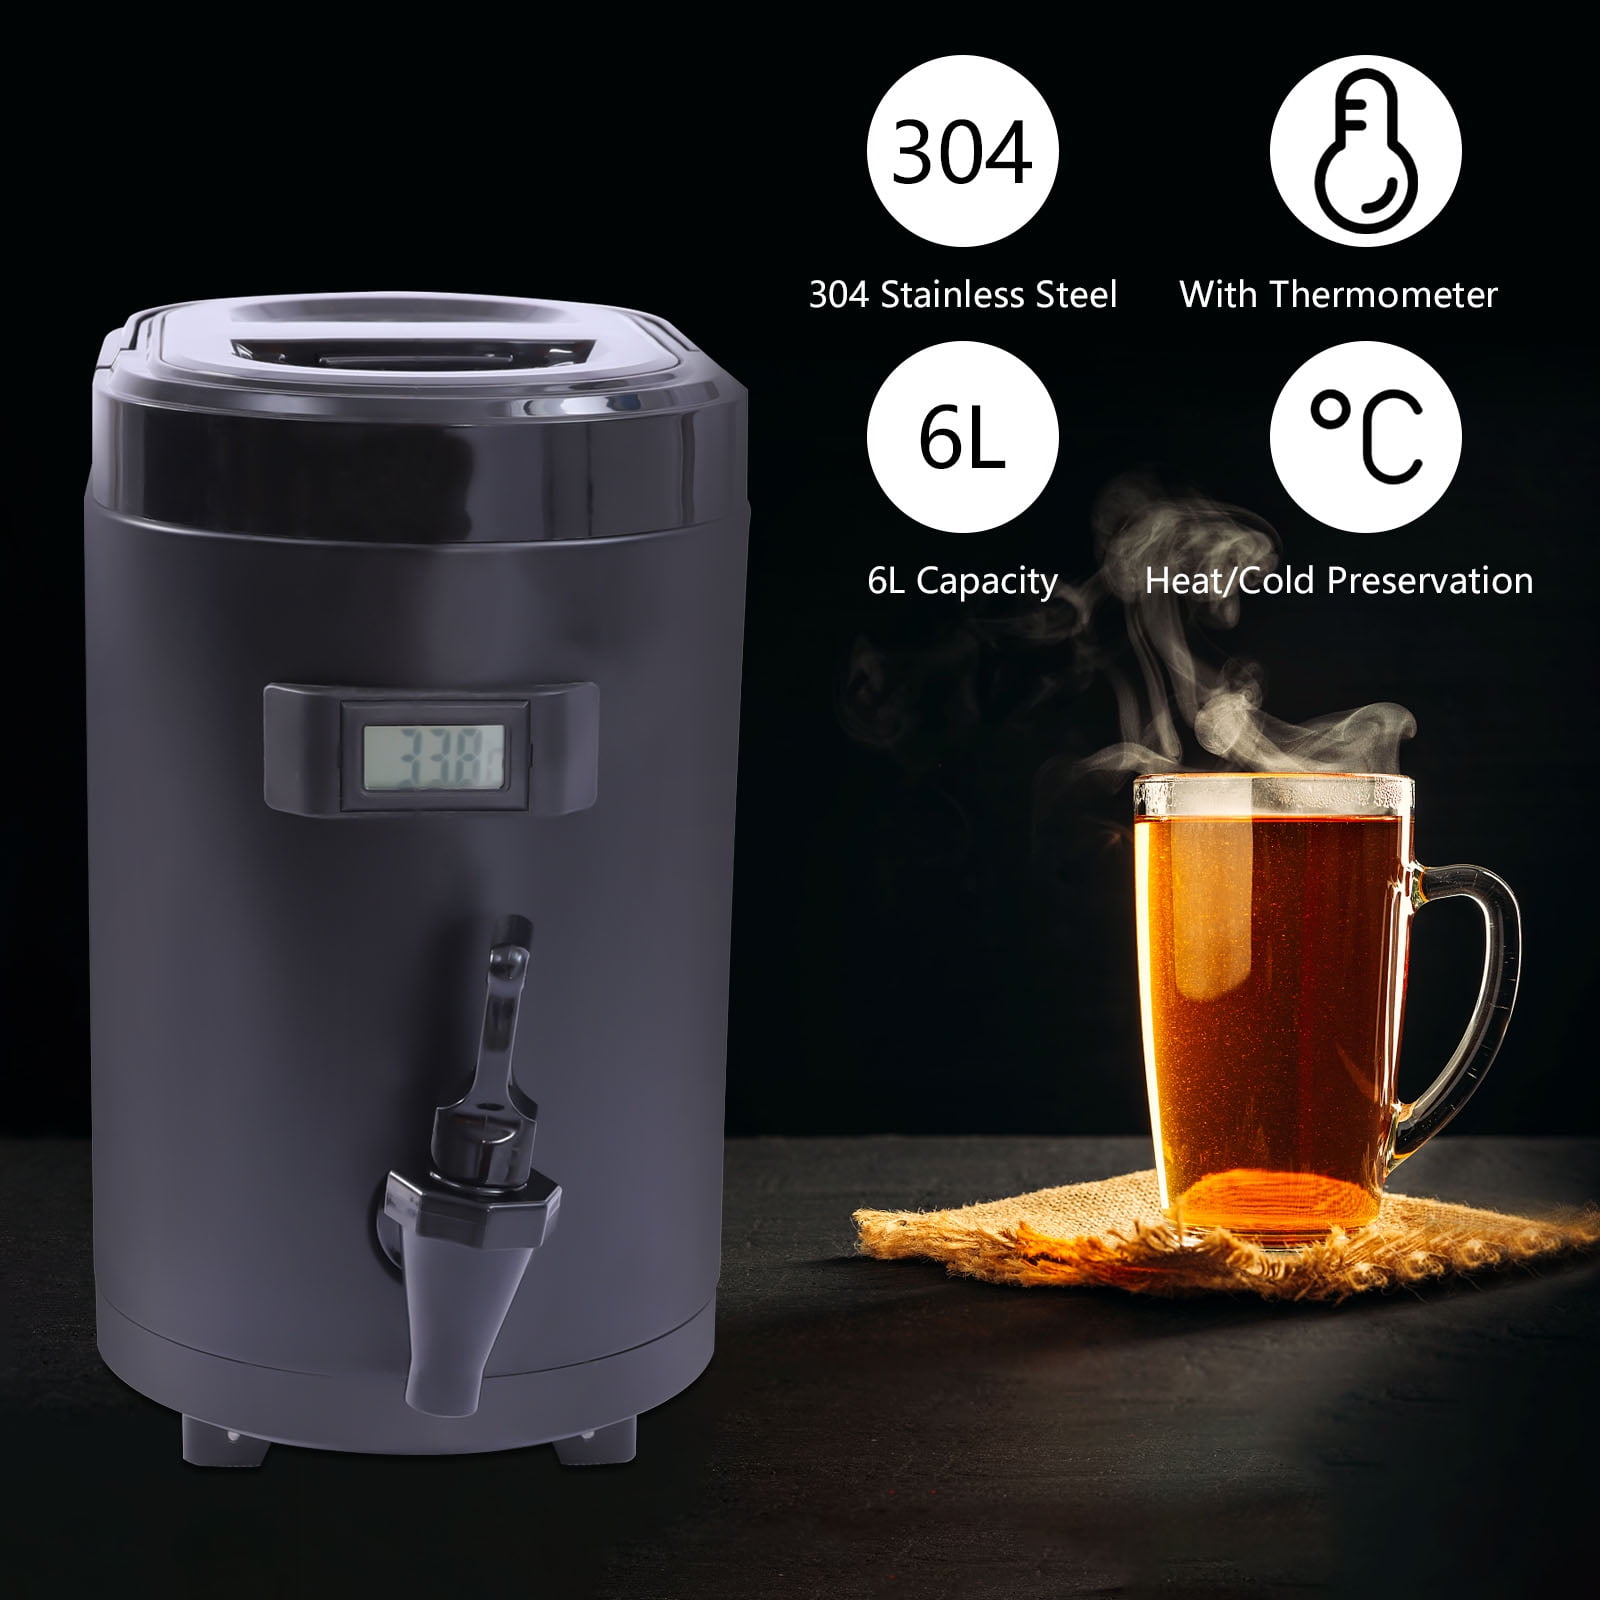 Miumaeov Insulated Beverage Dispenser – Food-grade 304 Stainless Steel Insulated  Thermal Hot and Cold Beverage Dispenser with Thermometer 12L-Square (Black)  